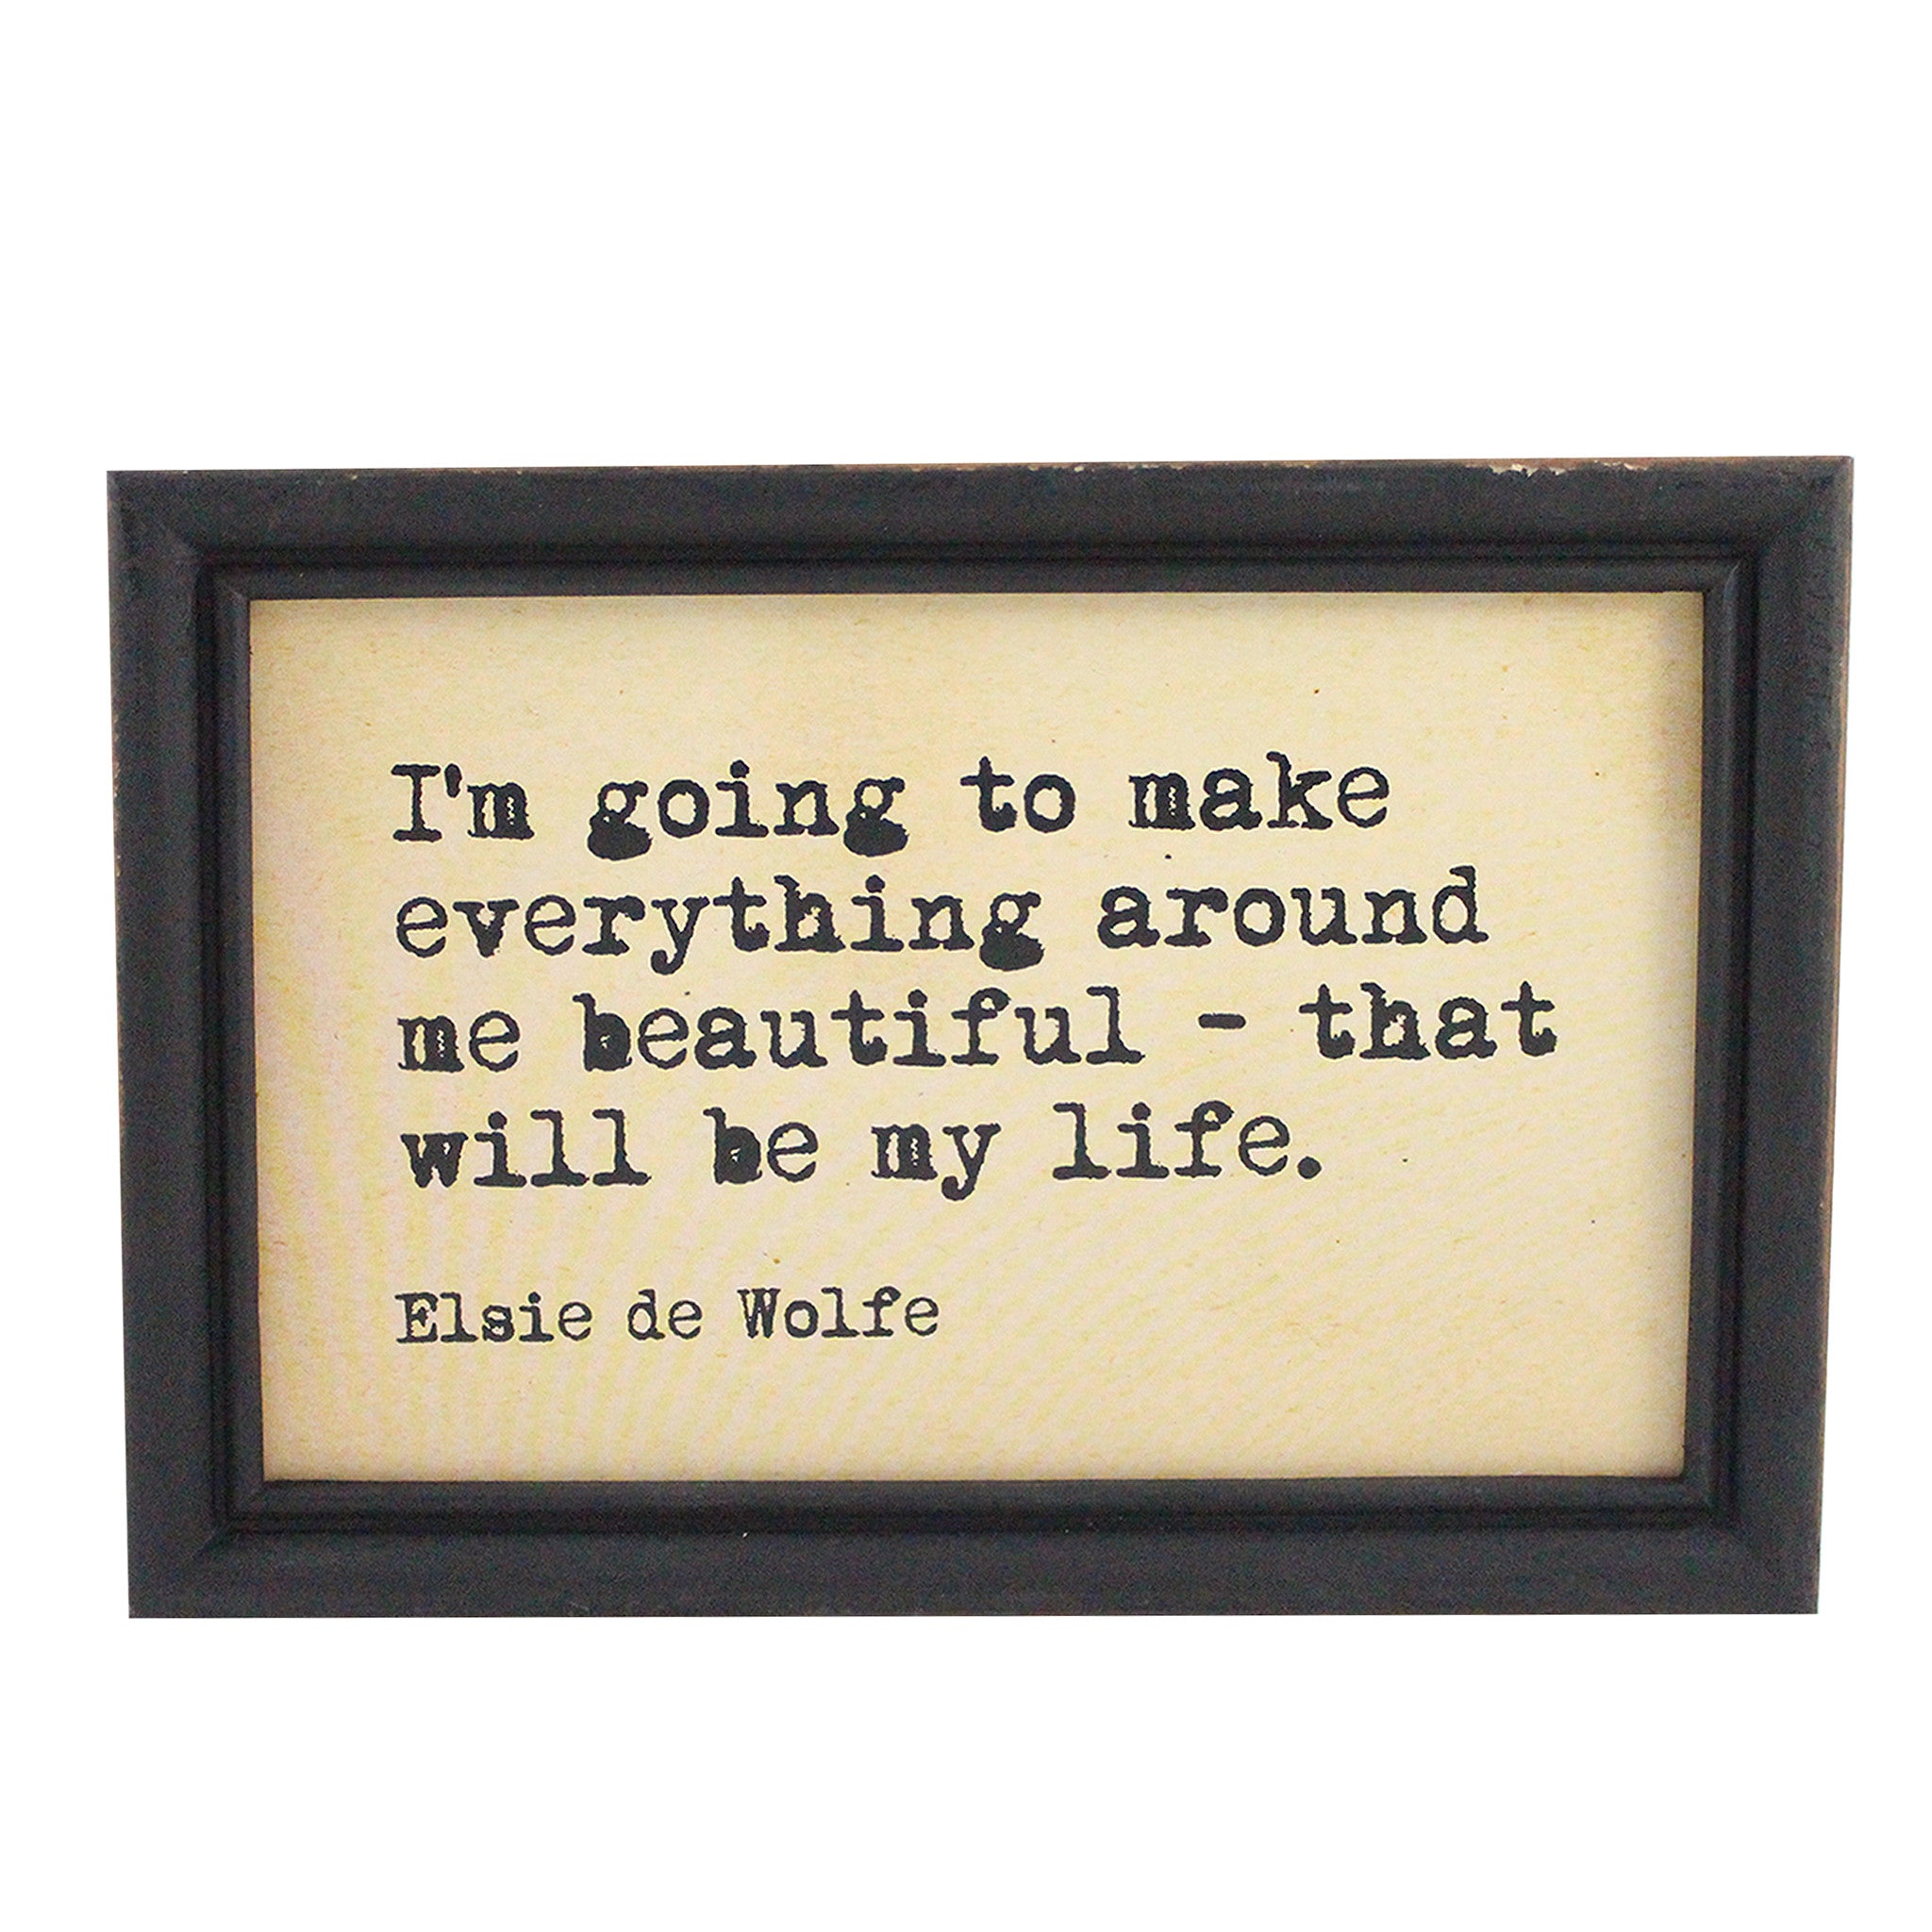 Wall　Everything　Quote　Framed　Going　Me　To　Make　Around　Beau　–　Candlestock　Hanging　